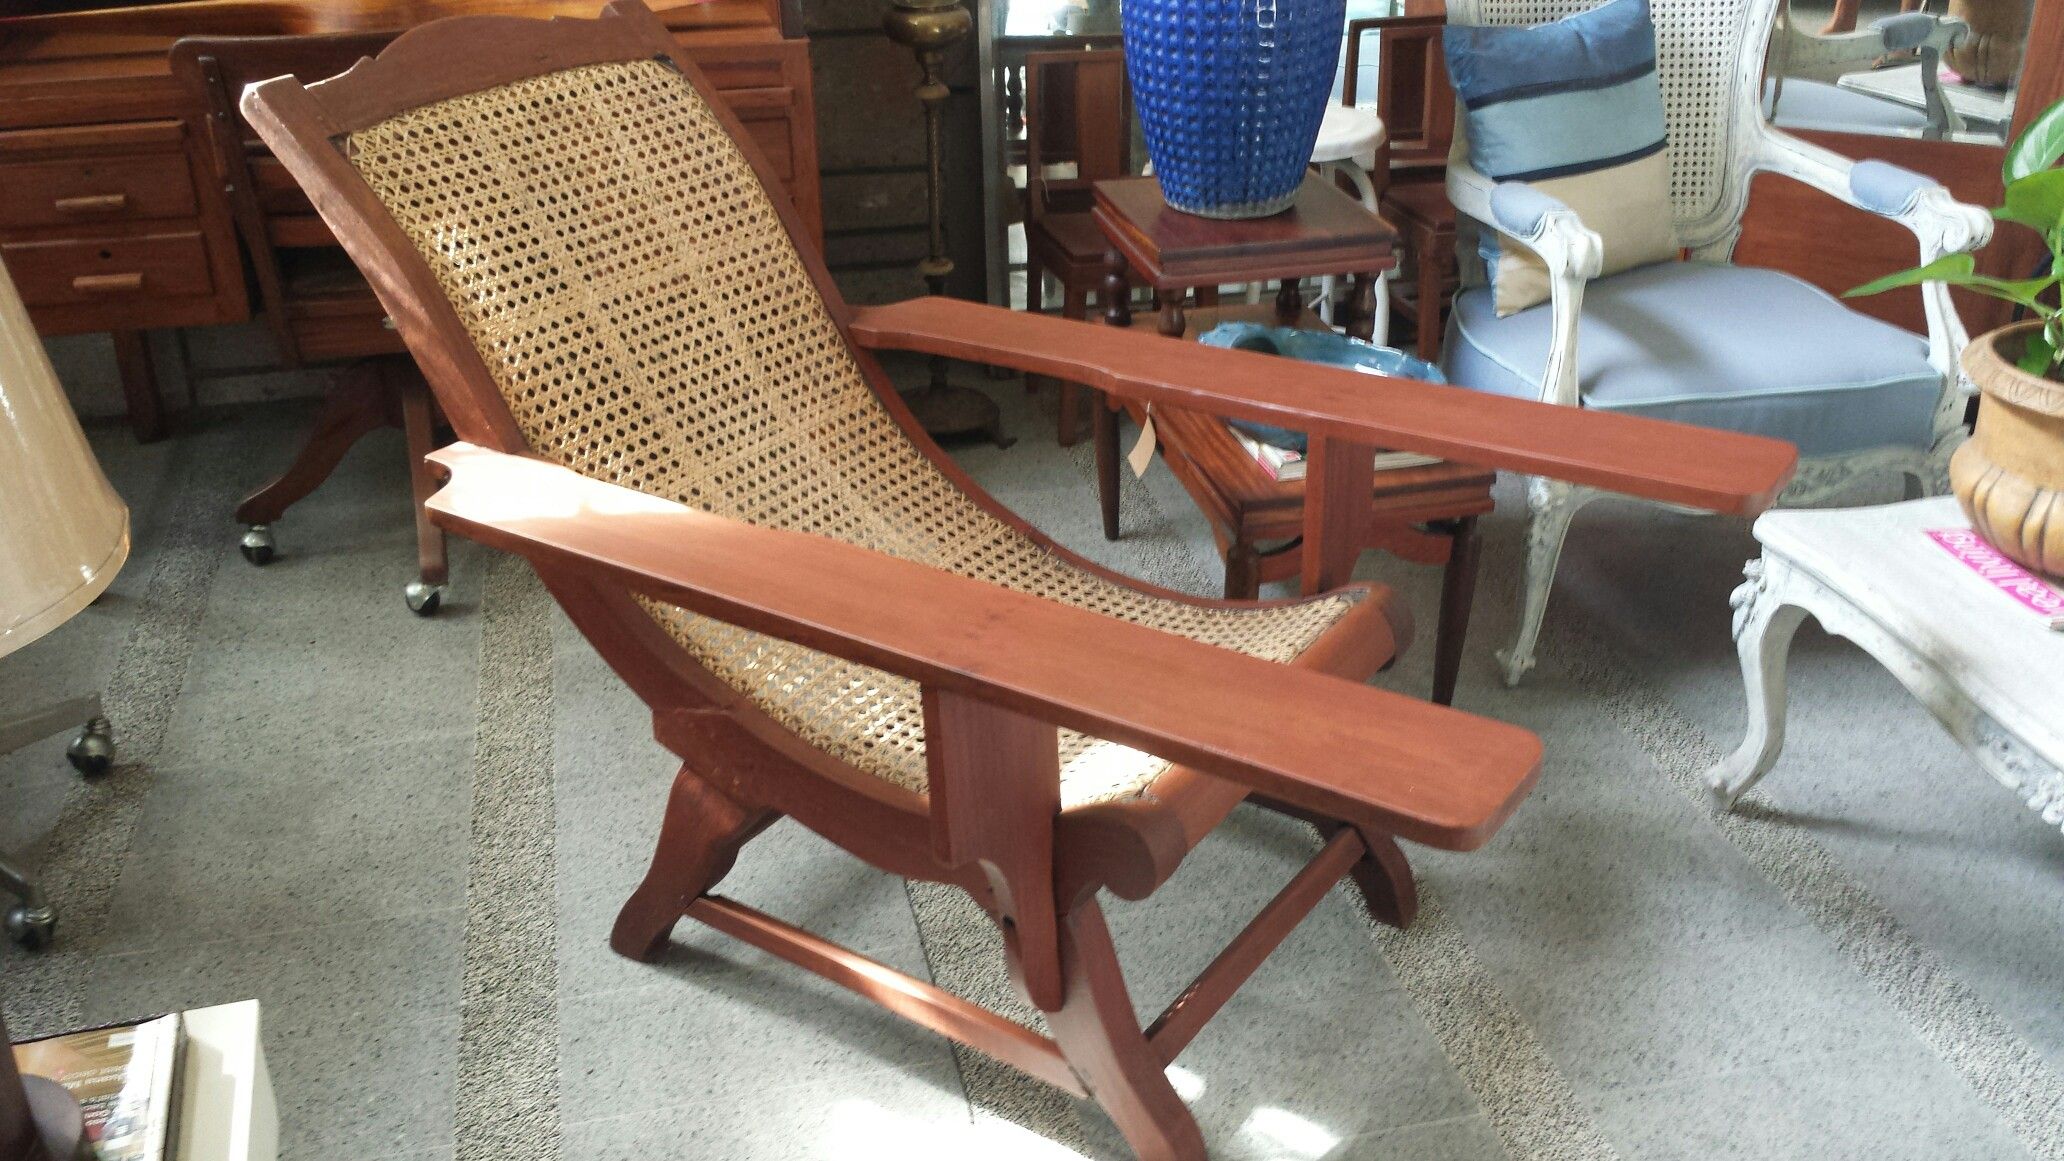 <ul><li><p>Region 2 (Isabela)</p></li><li><p>A wooden chair with long “arm rests” that are actually for the legs as it was originally used by women when giving birth</p></li></ul>